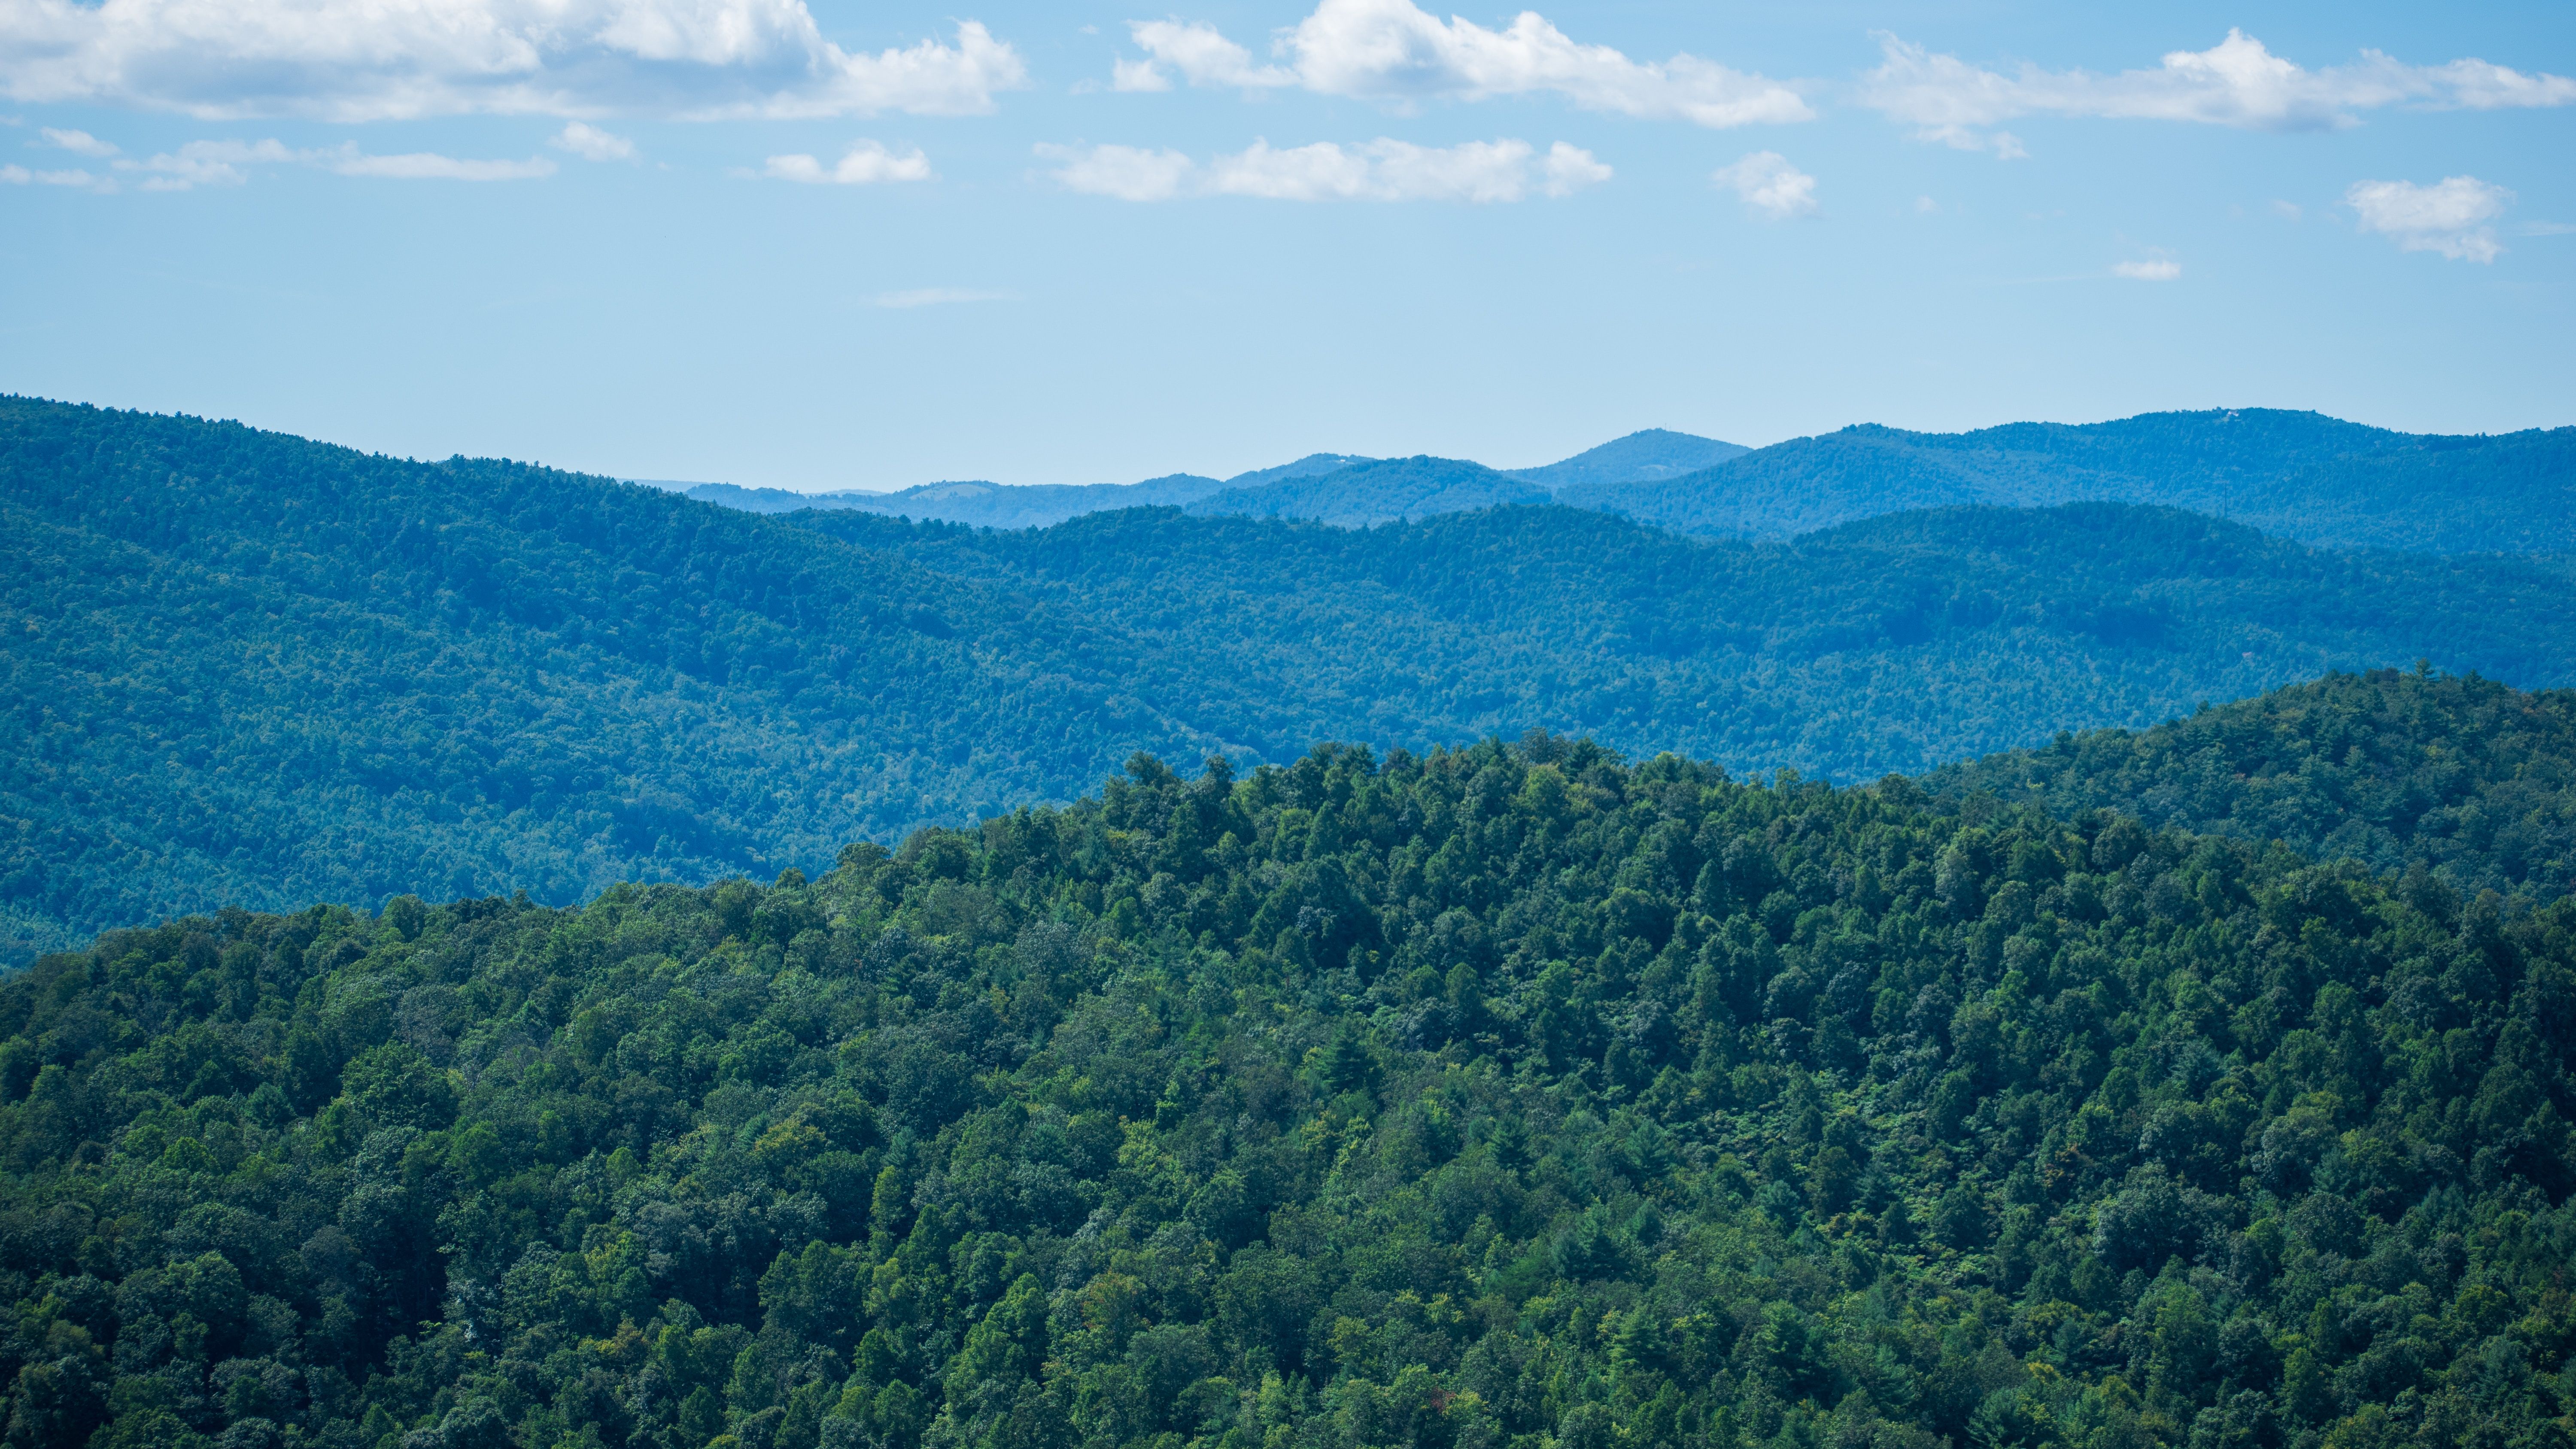 Appalachian mountains in Wilkes County, NC